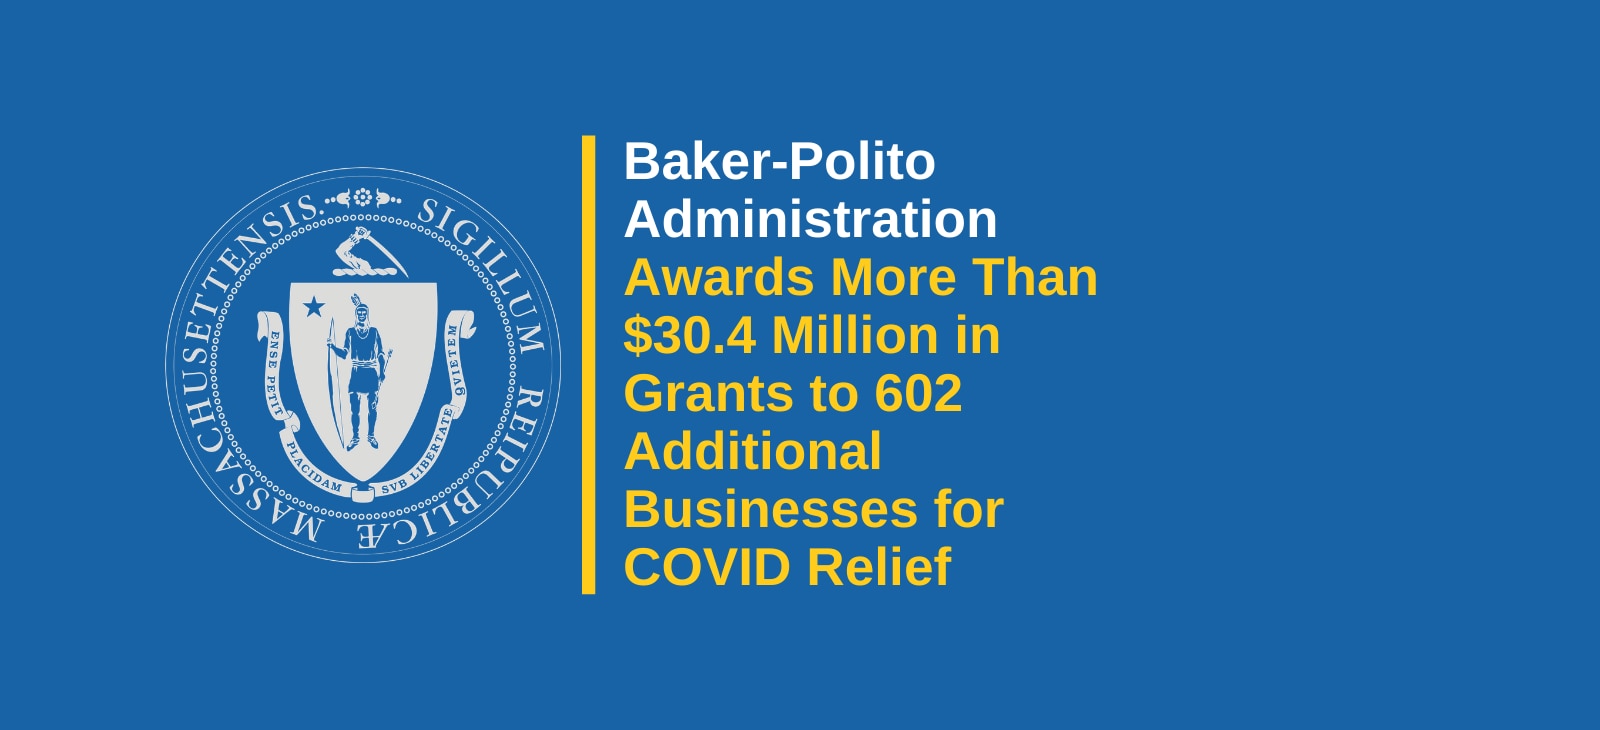 Baker-Polito Administration Awards More Than $30.4 Million in Grants to 602 Additional Businesses for COVID Relief